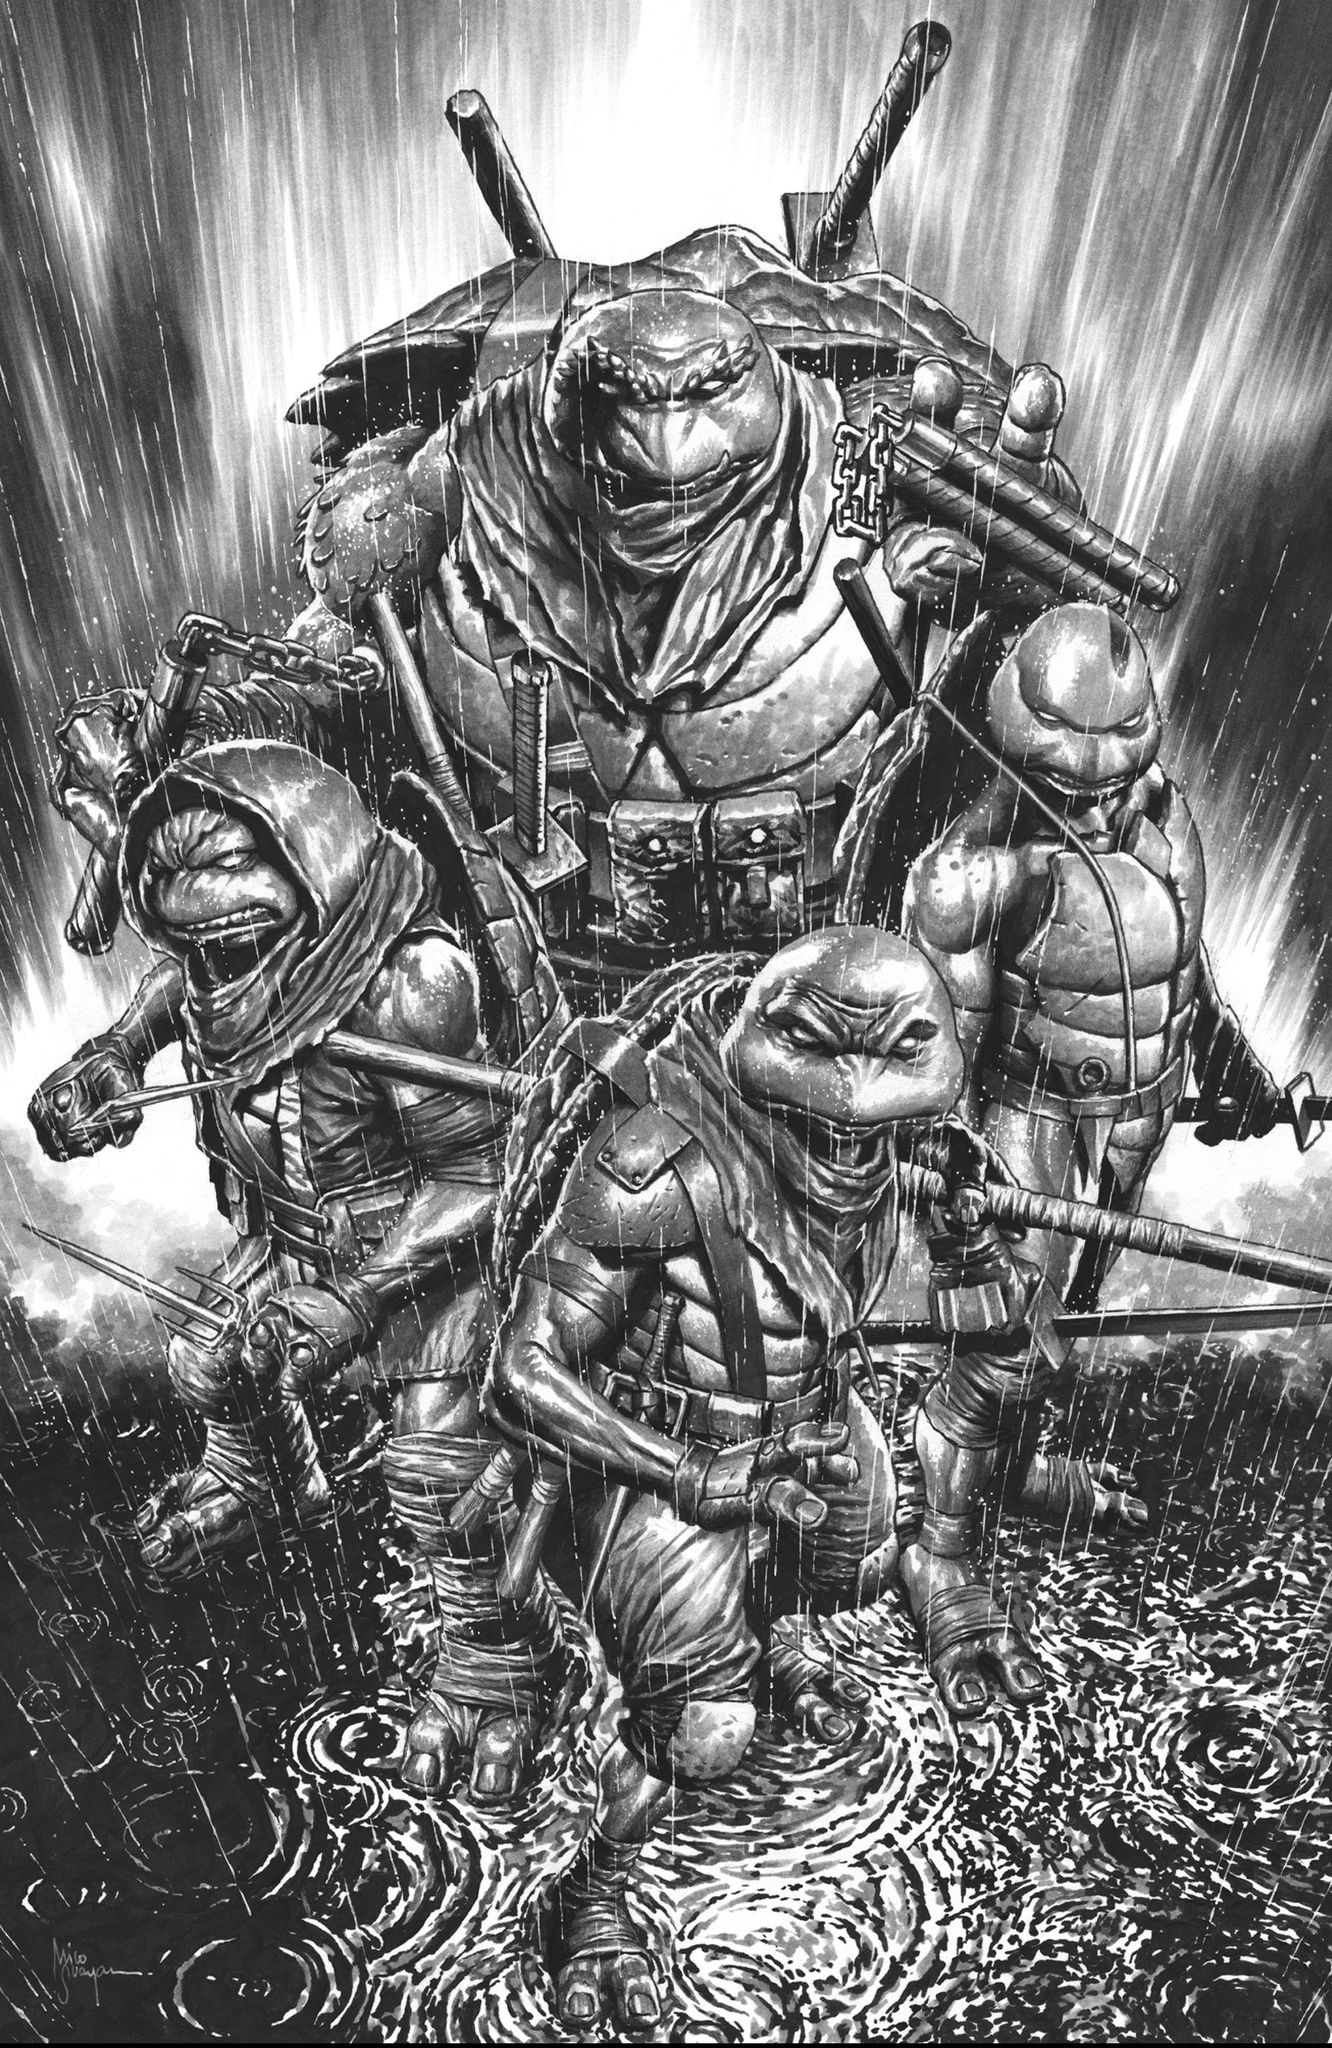 TMNT THE LAST RONIN RE-EVOLUTION #1 MICO SUAYAN C2E2 EXCLUSIVE SKETCH VARIANT OPTIONS